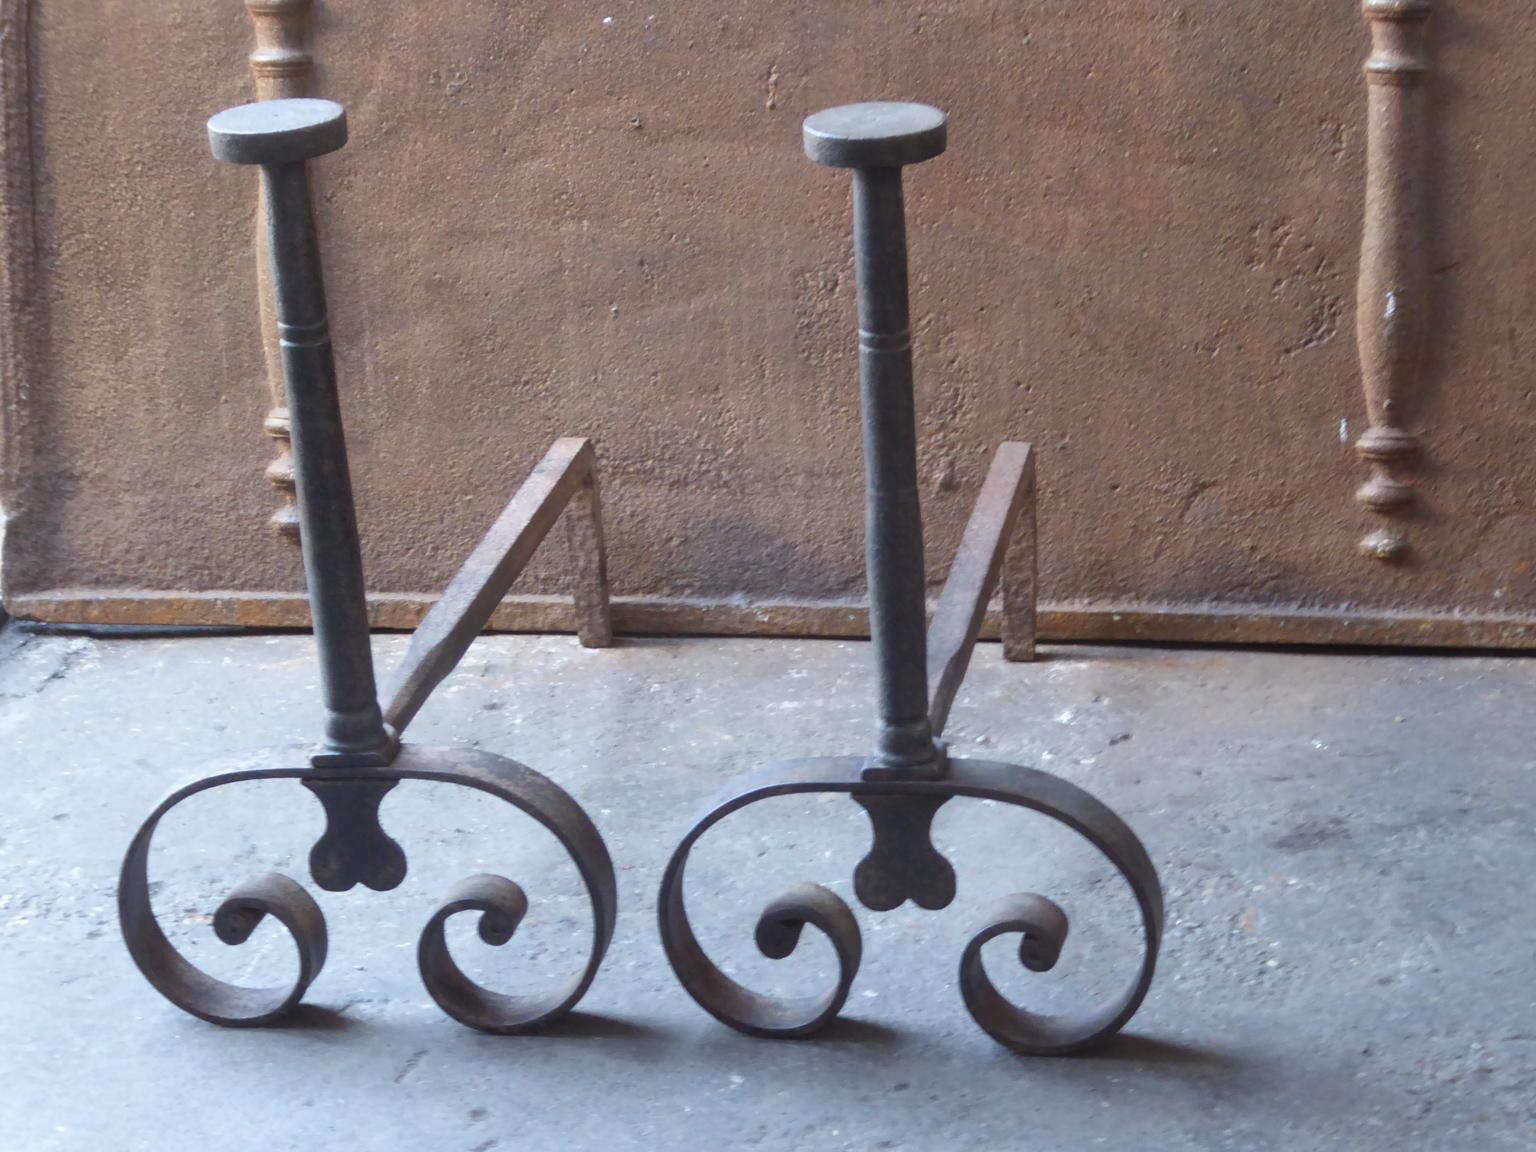 19th century French Napoleon III andirons made of hand forged wrought iron. The andirons are in a good condition.